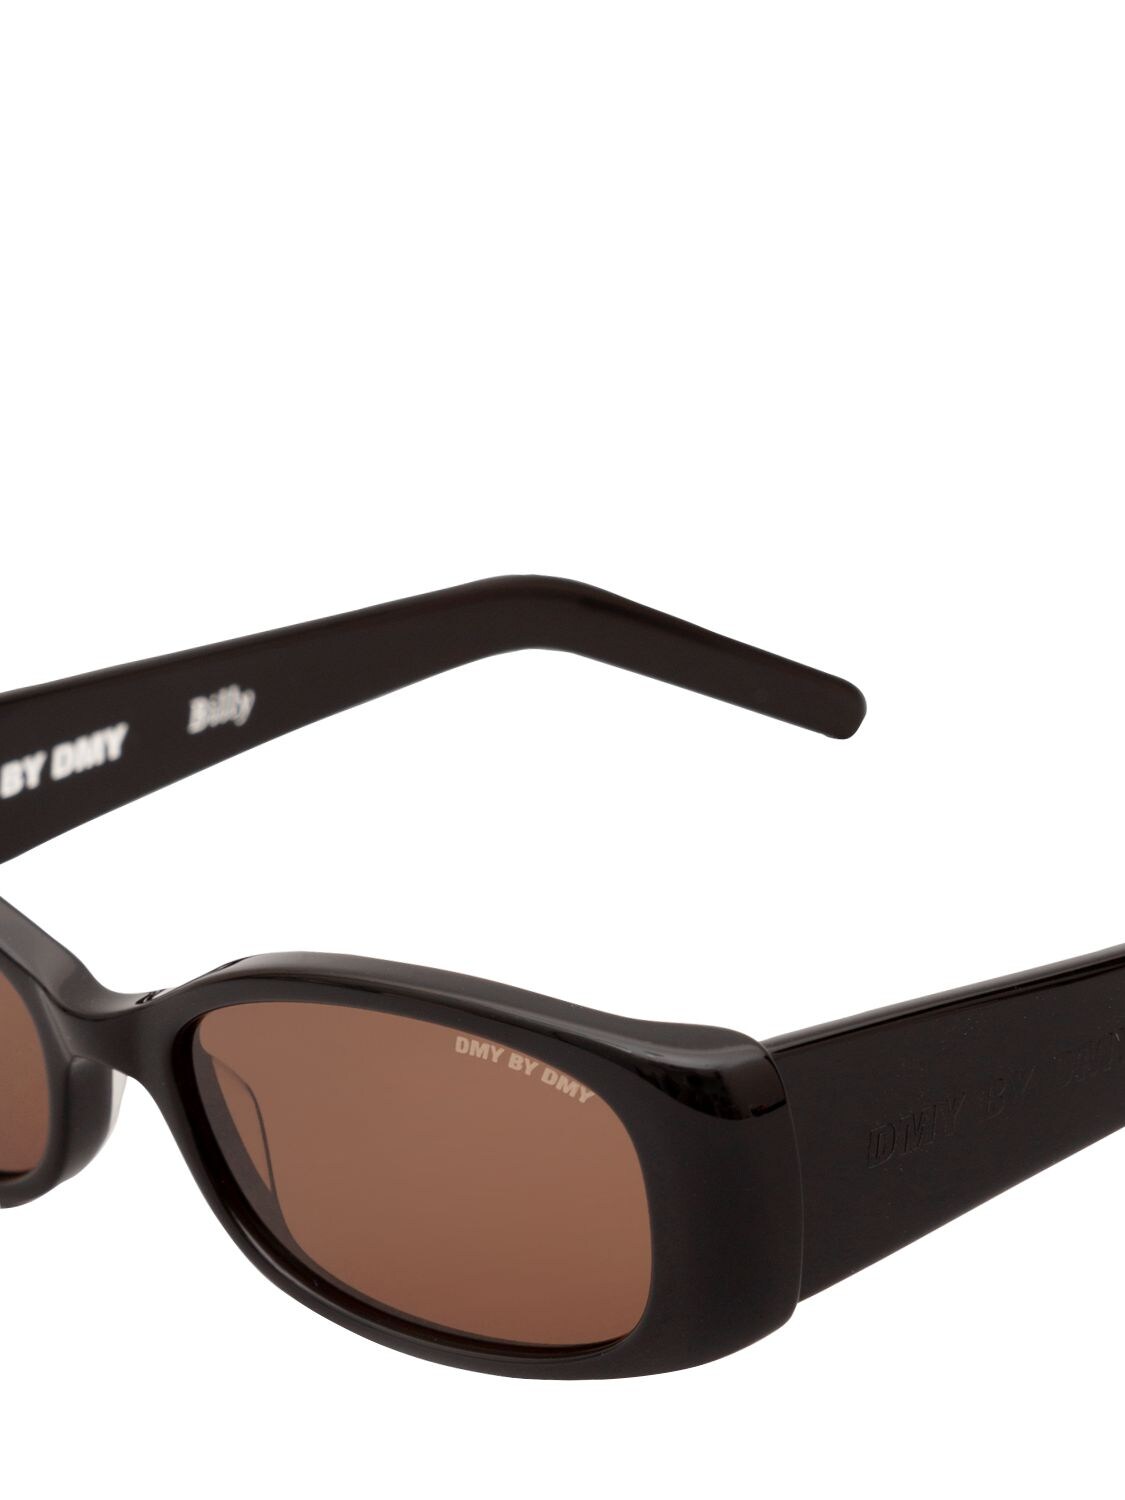 Shop Dmy By Dmy Billy Oval Acetate Sunglasses In Black,brown